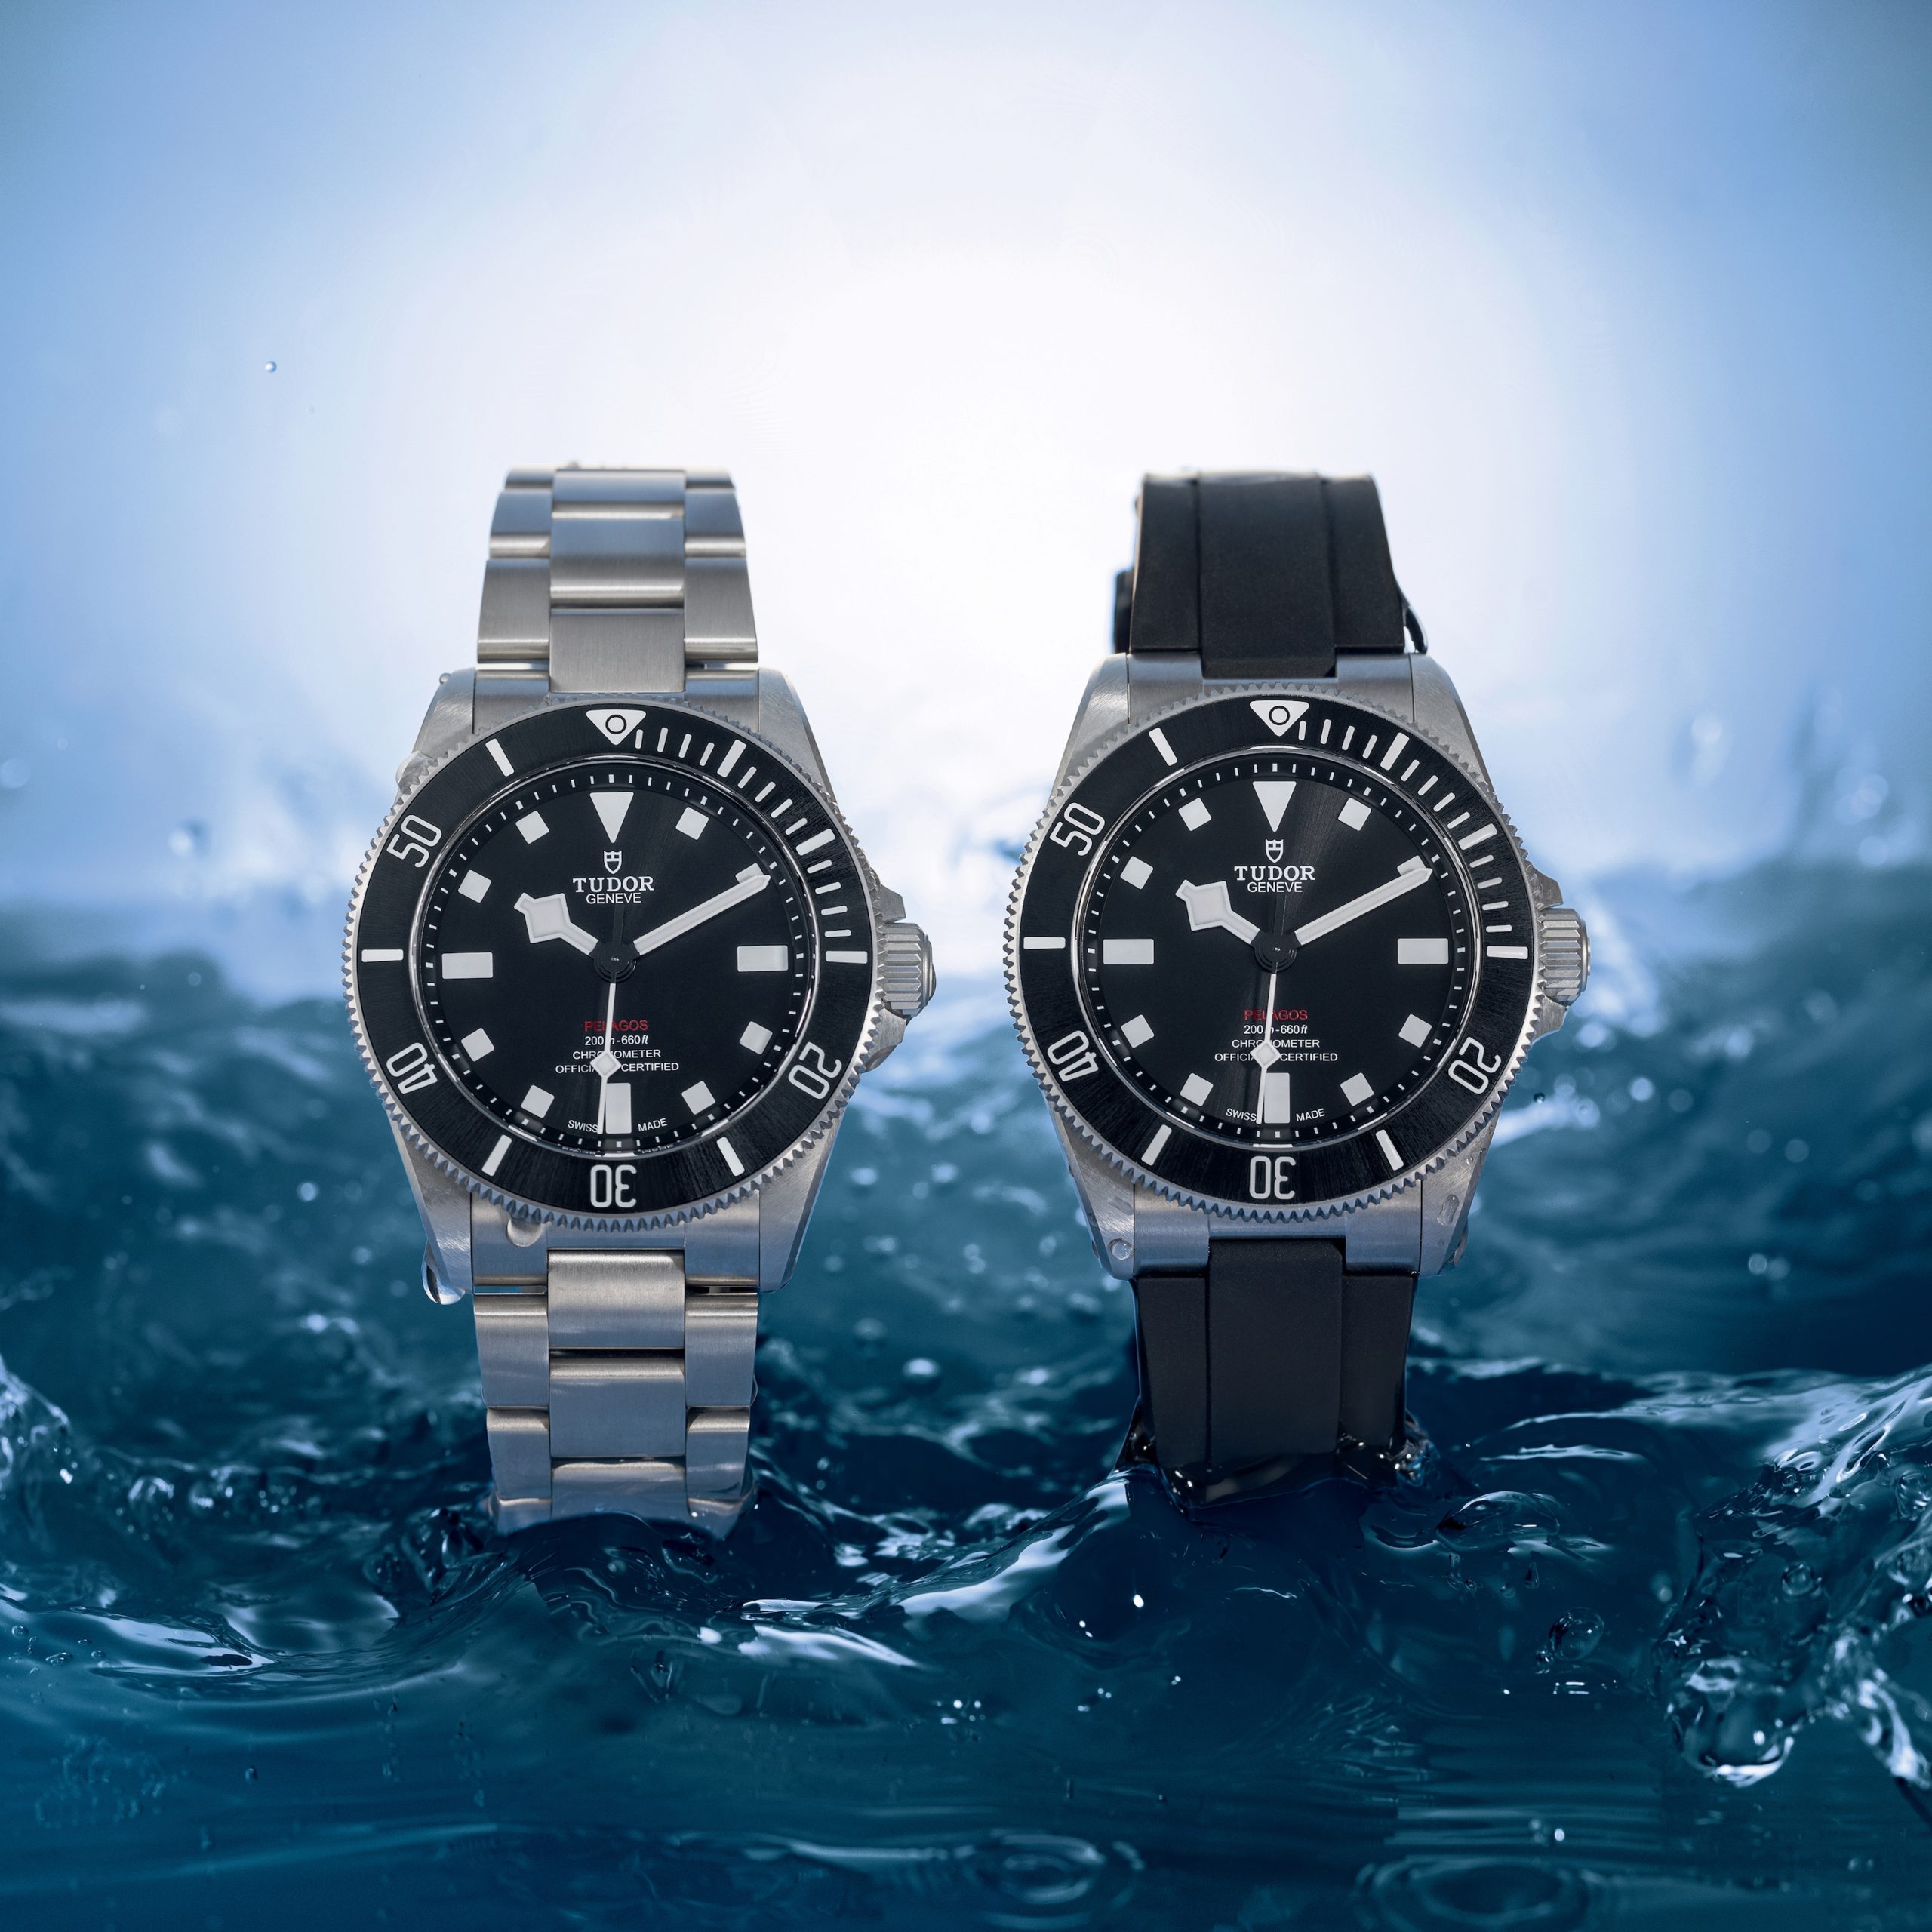 Tudor Drops Next Generation of the Pelagos with a Smaller Case Size